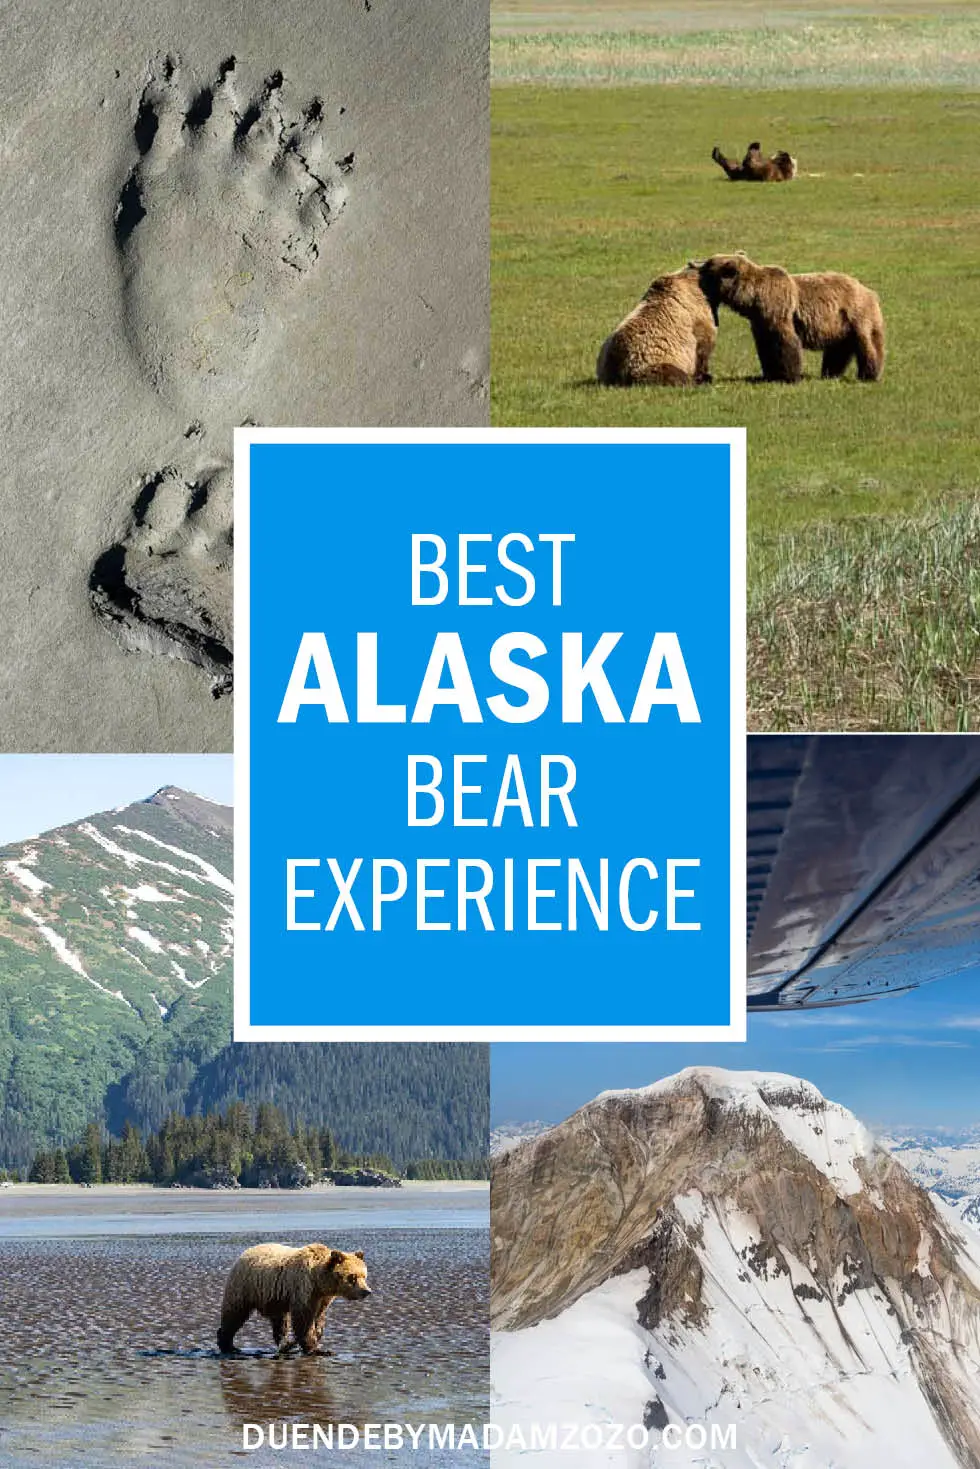 Pin with images of bear viewing day trip and title "Best Alaska Bear Experience"